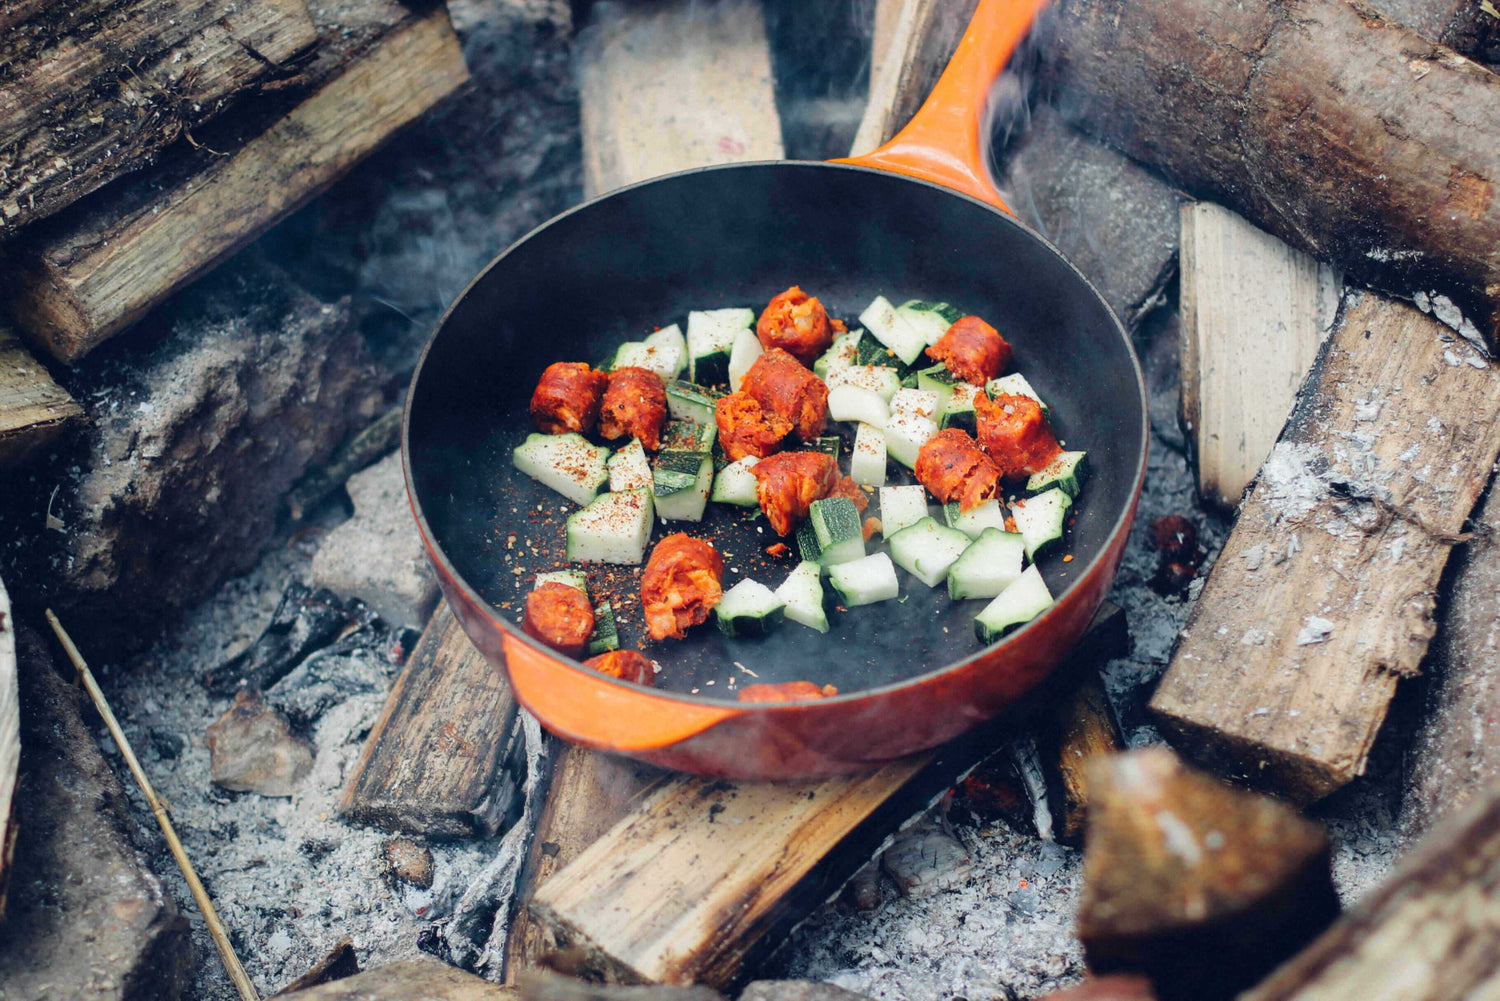 Guide to Seasoning Your Camp Oven